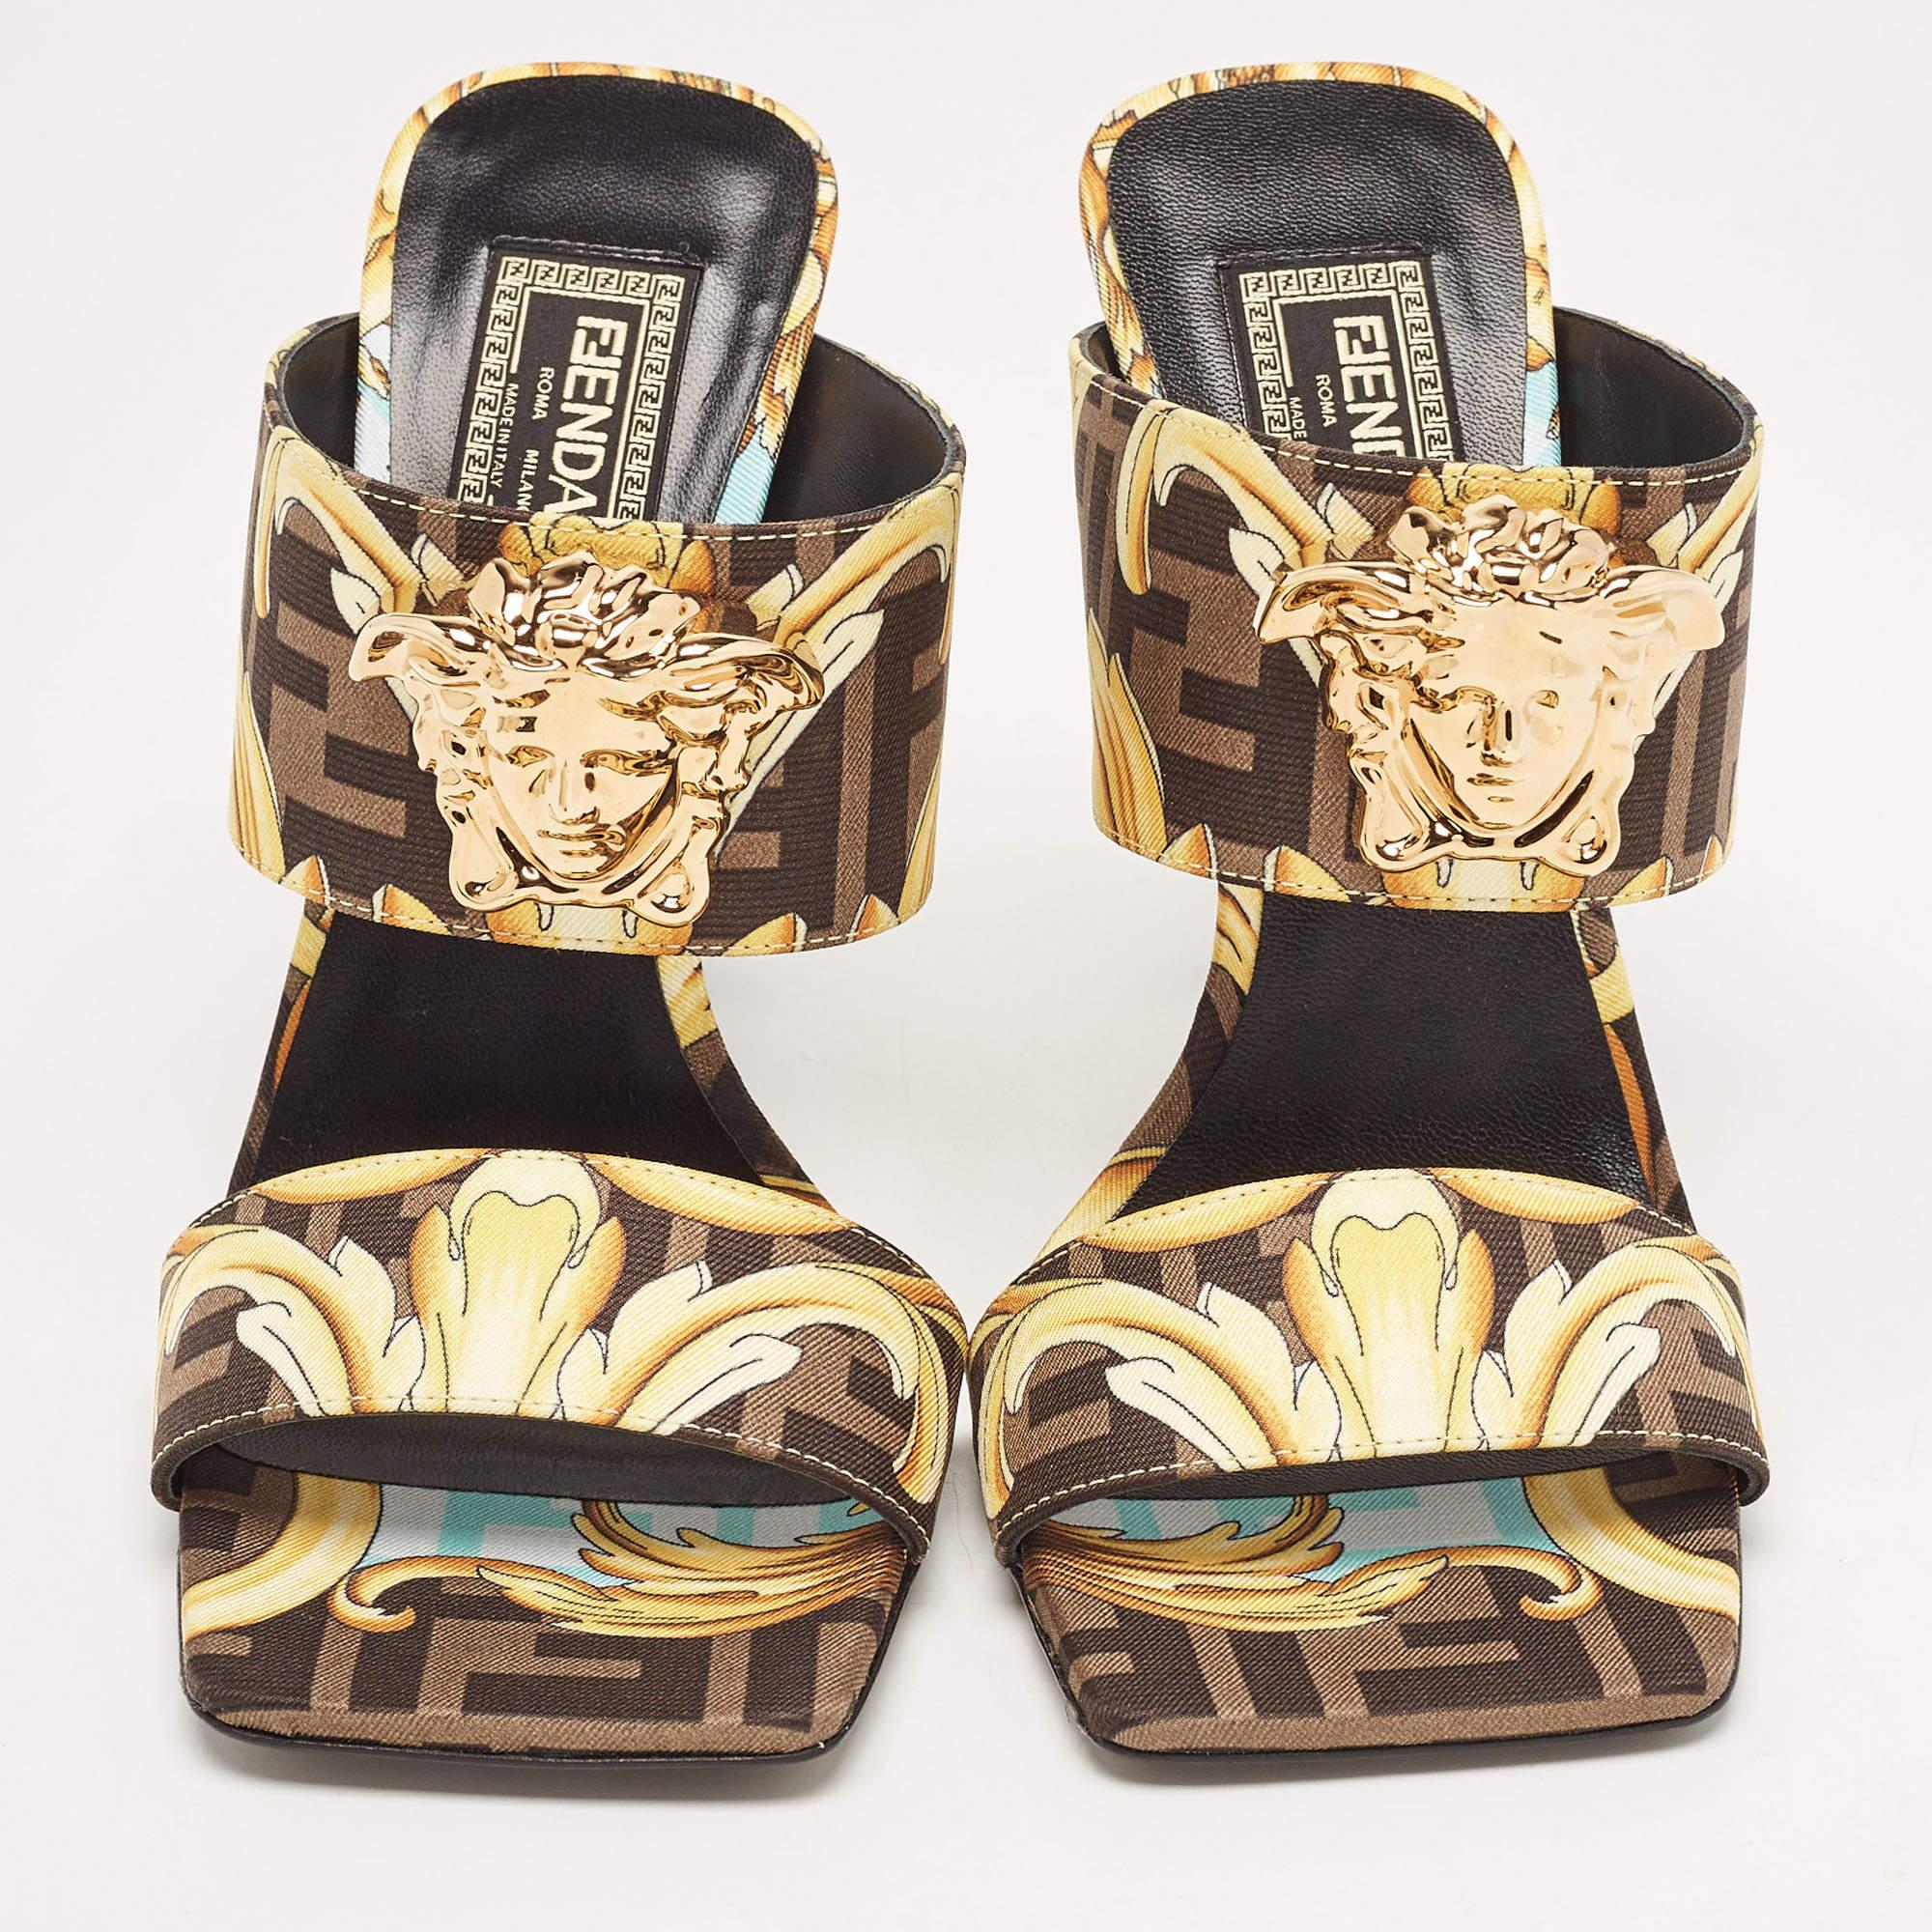 Perfectly sewn and finished to ensure an elegant look and fit, these Fendi x Versace slides are a purchase you'll love flaunting. They look great on the feet.

Includes: Original Dustbag, Original Box